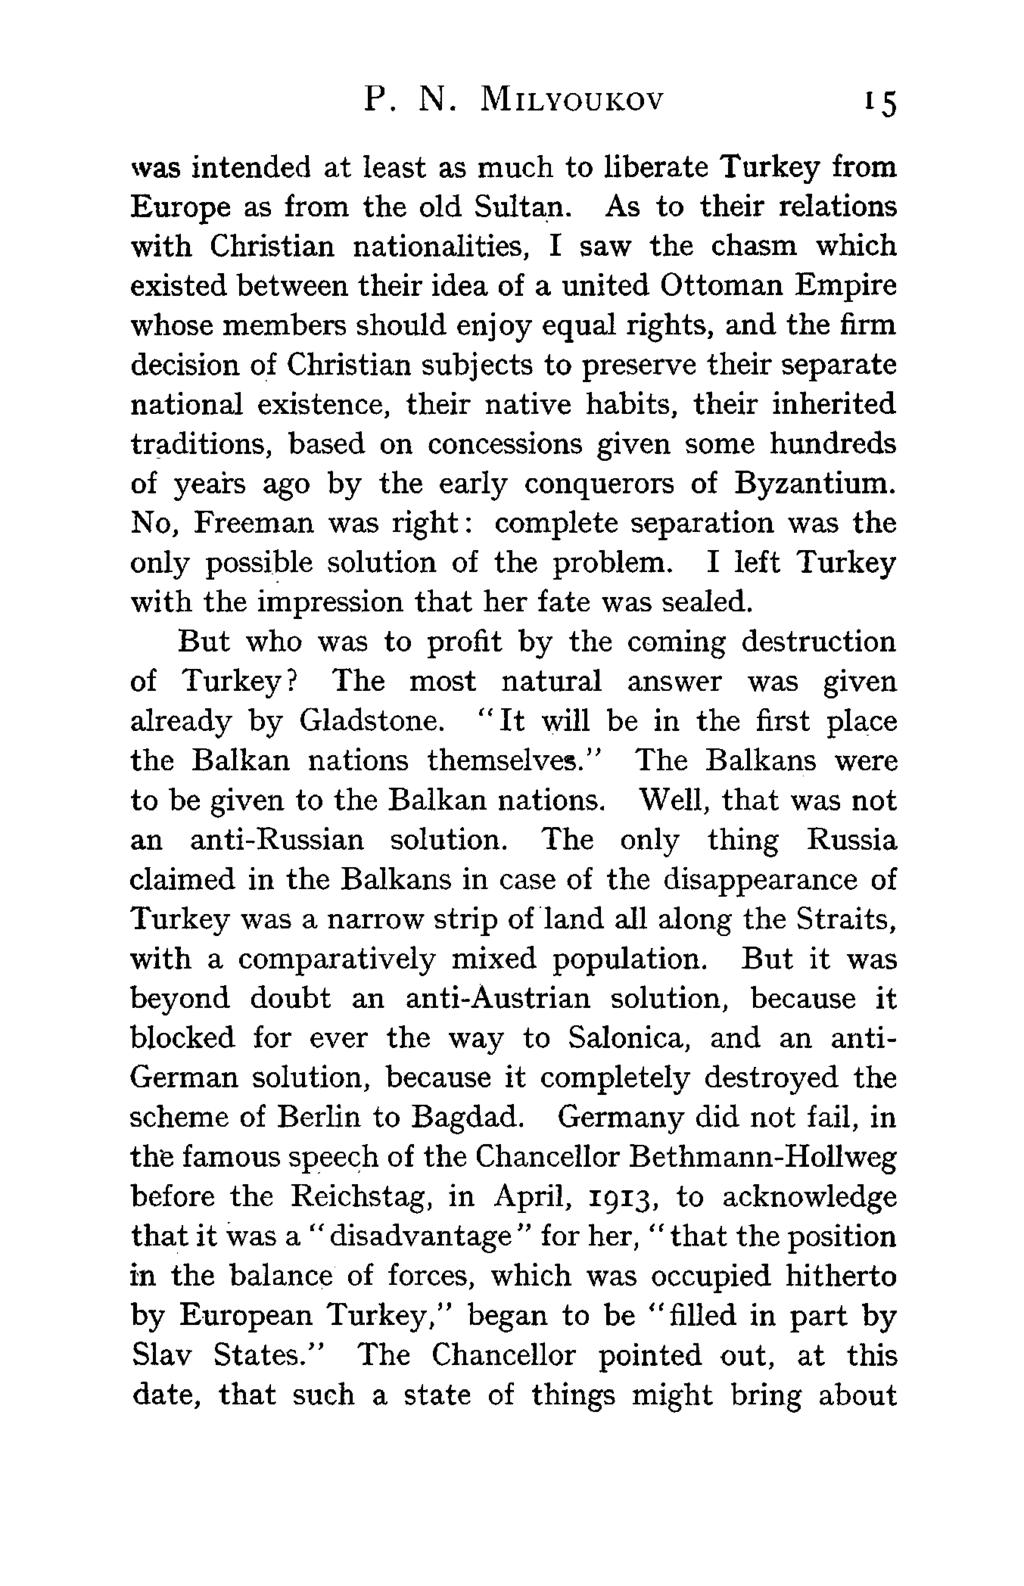 P. N. MILYOUKOV 15 was intended at least as much to liberate Turkey from Europe as from the old Sultan.